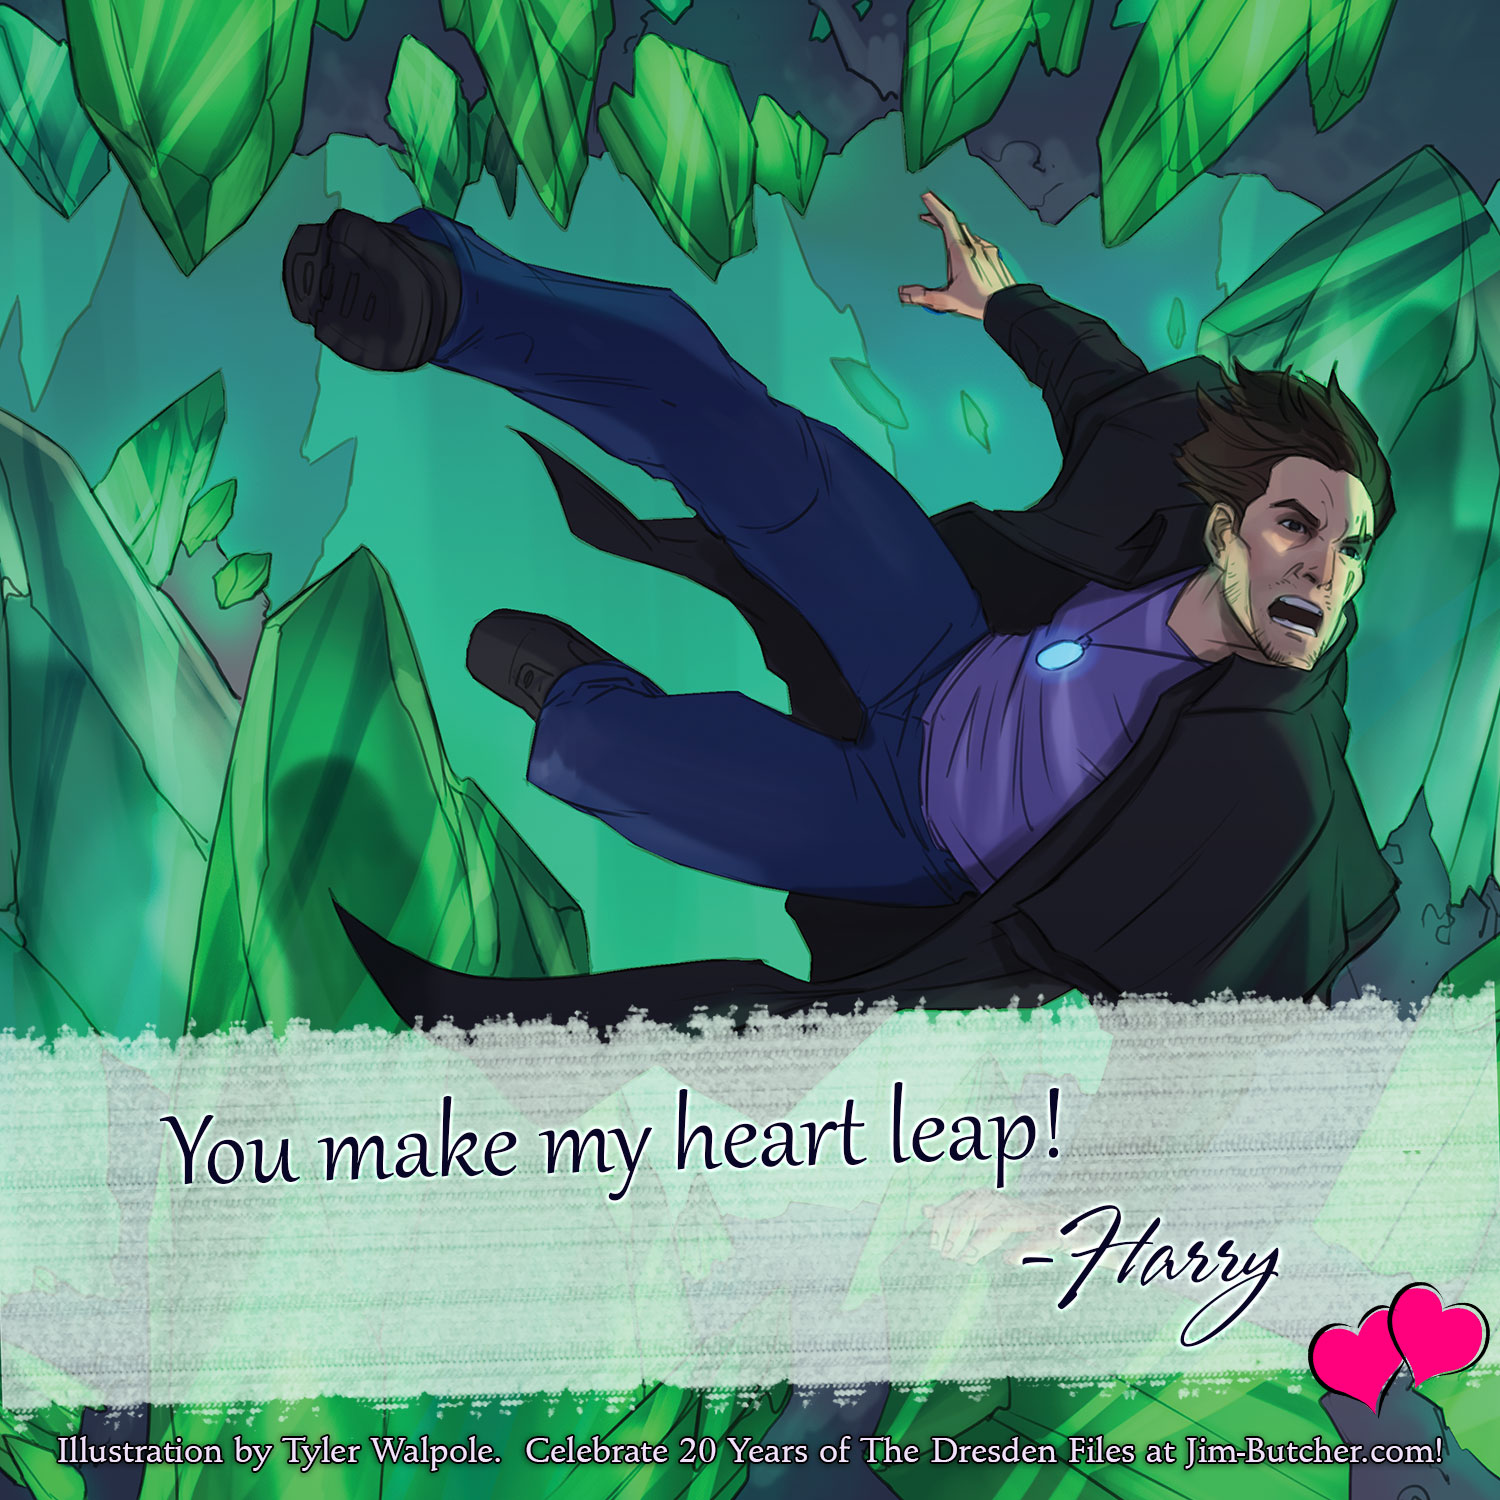 Harry: You make my heart leap!